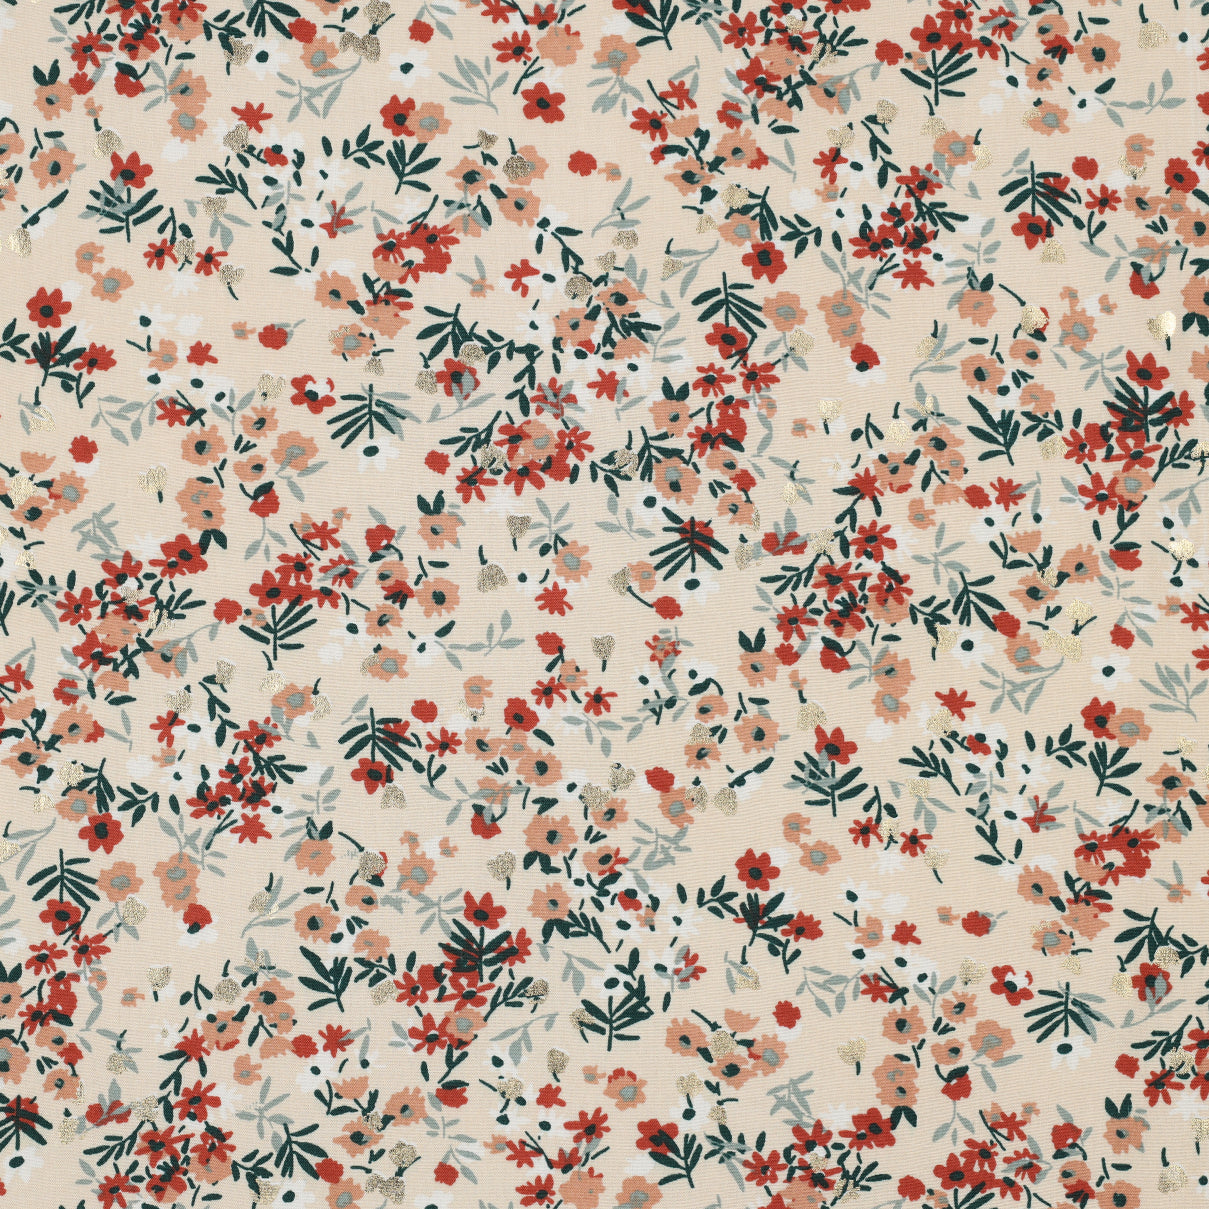 REMNANT 0.48 Metre - Sparkle Flowers on Beige Viscose Fabric